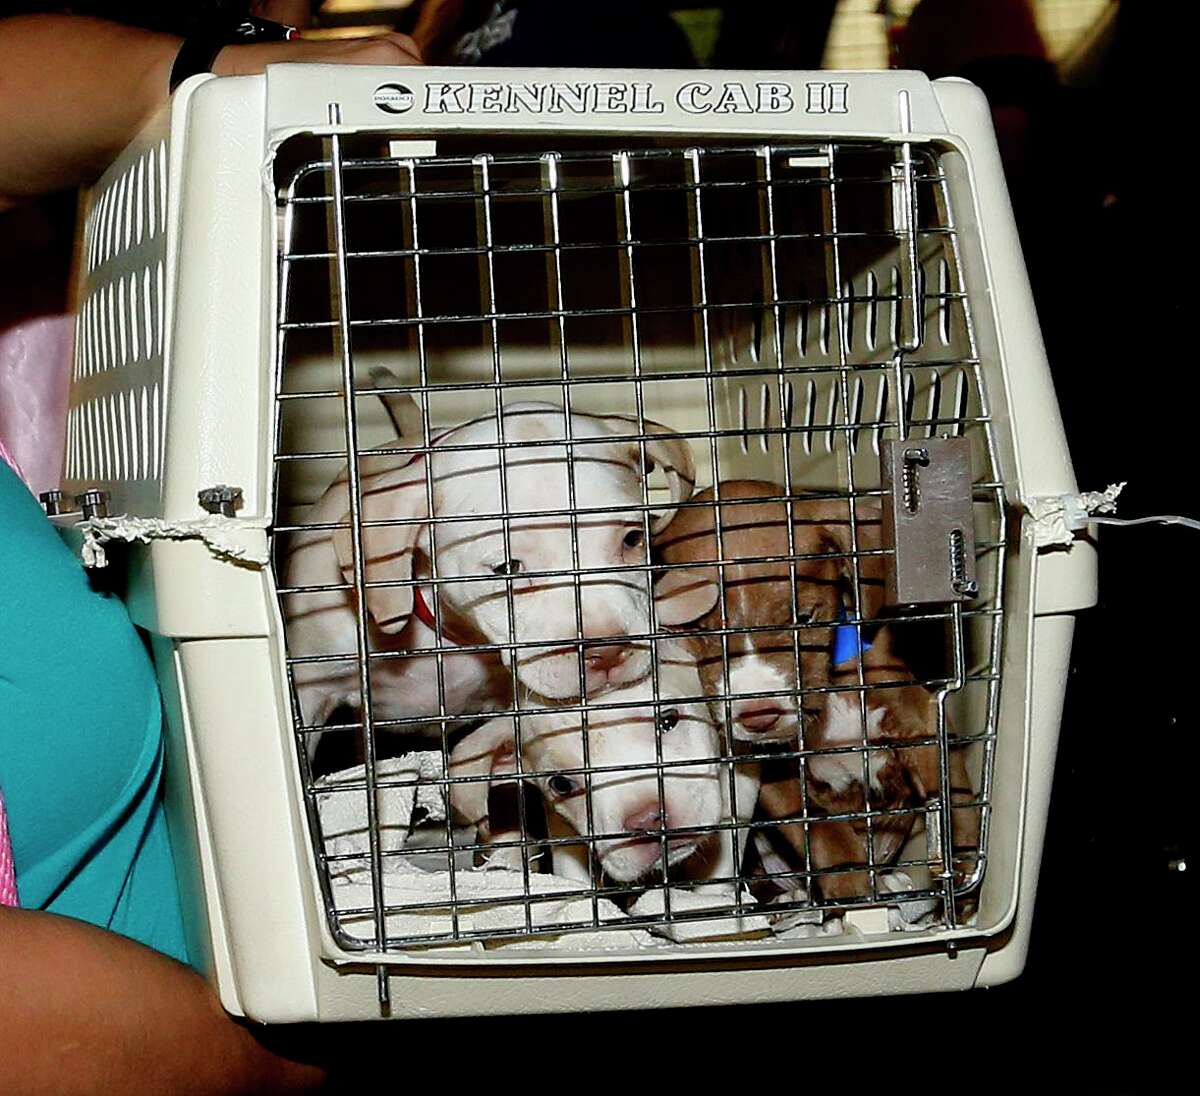 The San Antonio Humane Society is partnering with Florida animal shelters to transport 73 dogs and 30 cats displaced by Hurricane Ian.